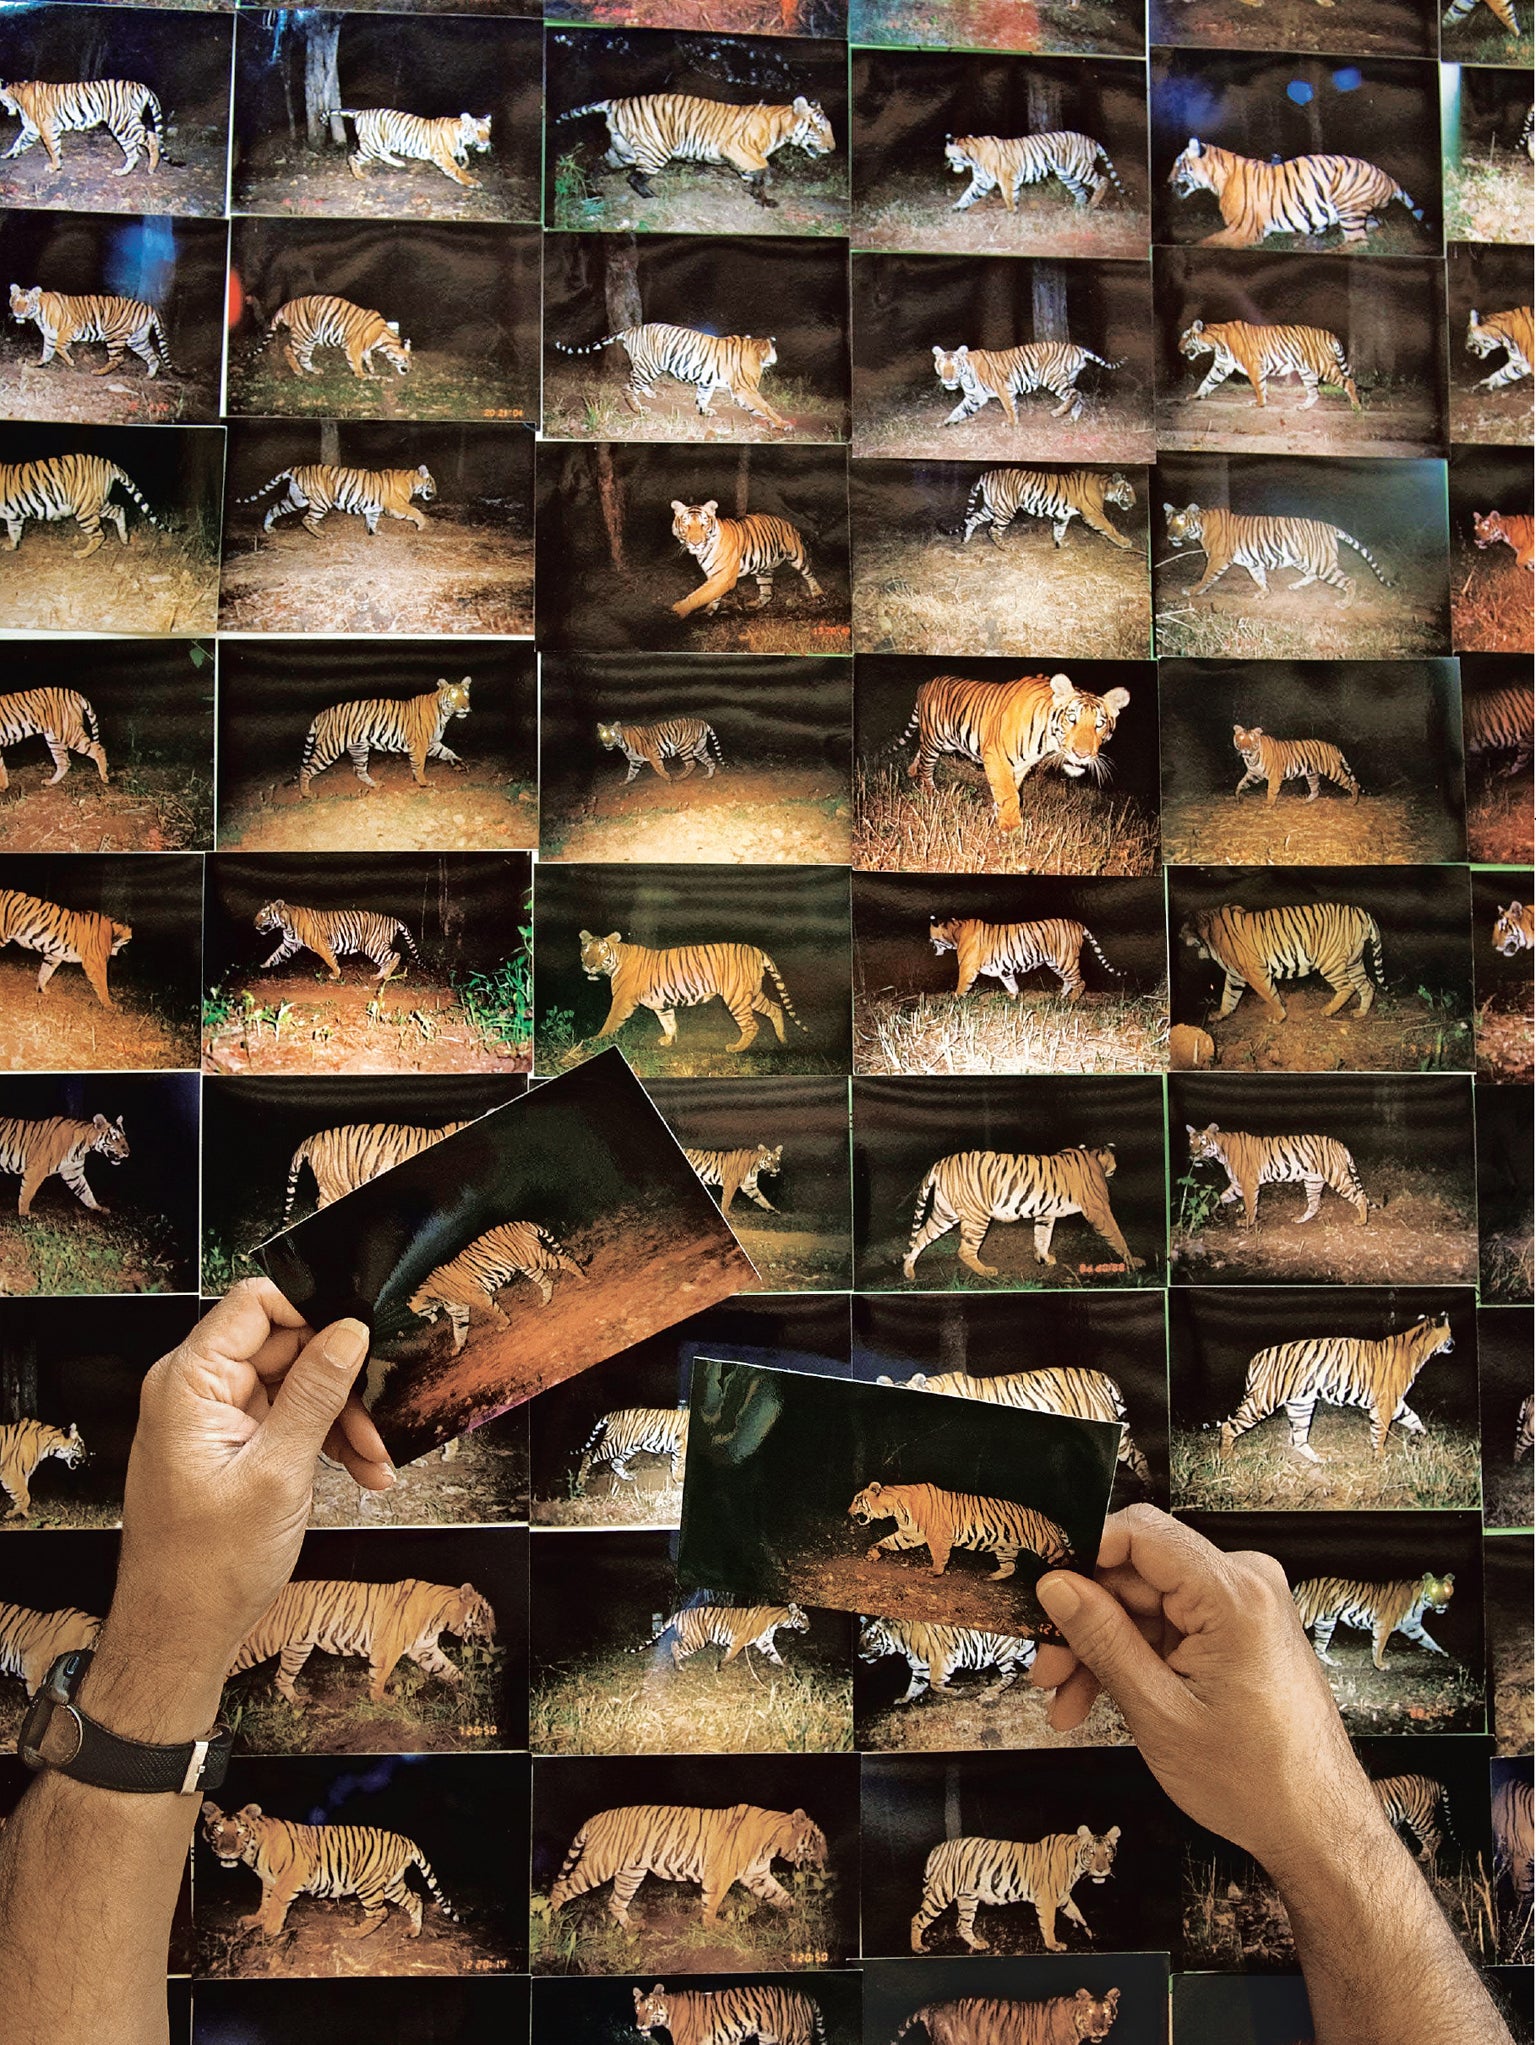 The Trouble with Tiger Numbers - Scientific American